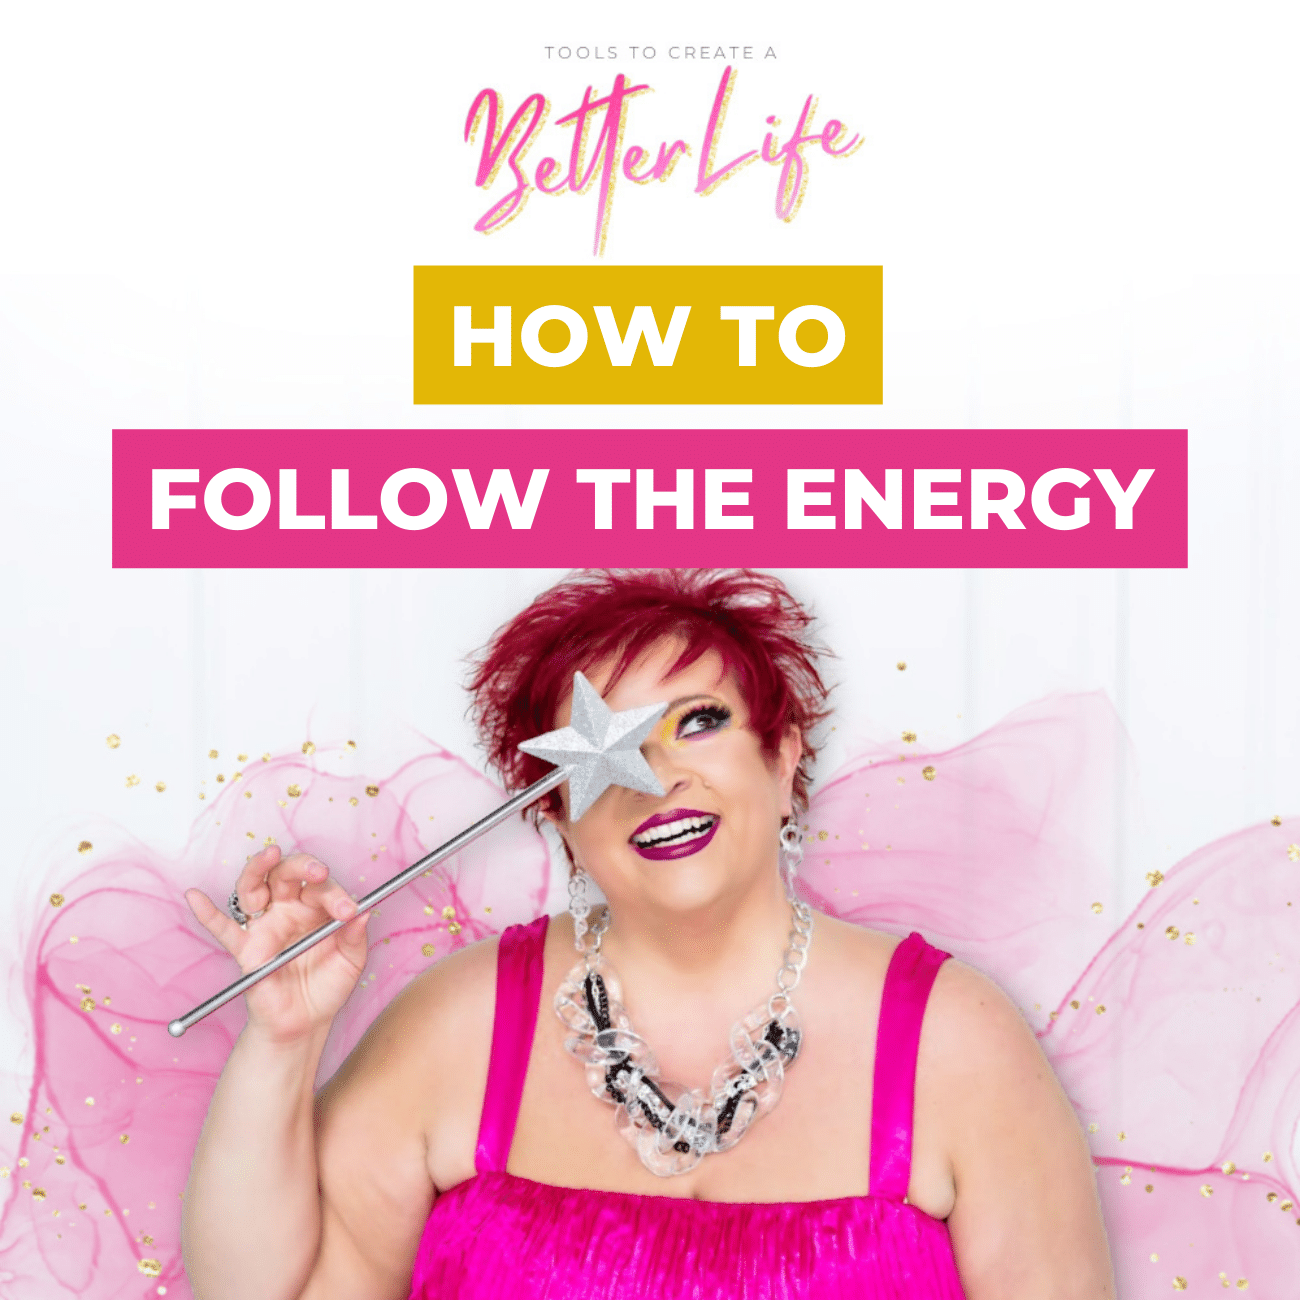 How to Follow the Energy